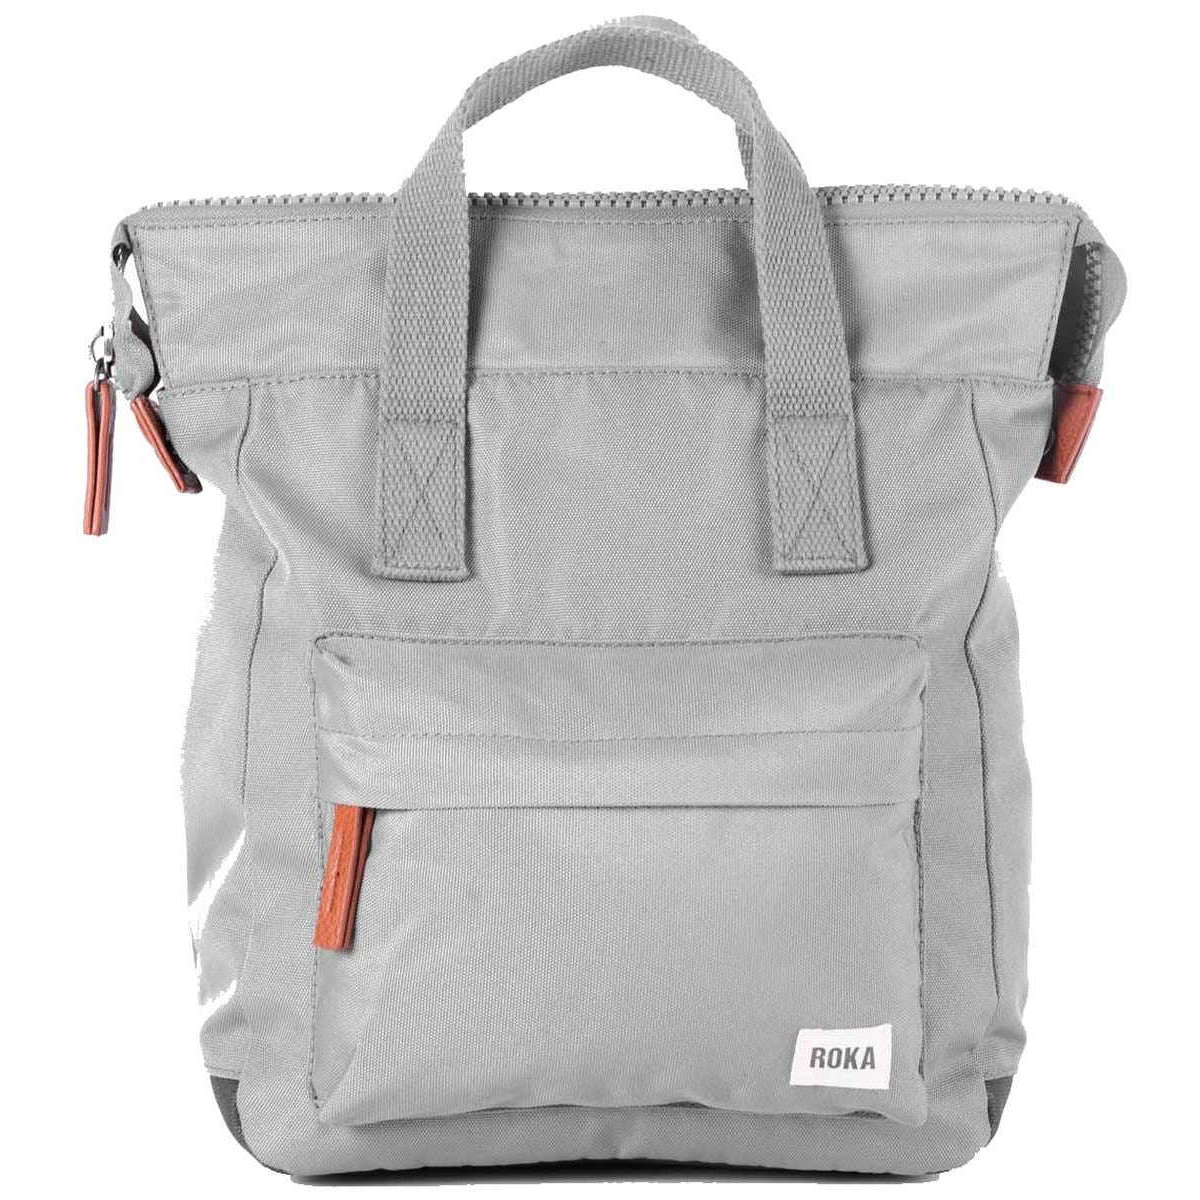 Roka Bantry B Small Sustainable Canvas Backpack - Stormy Grey